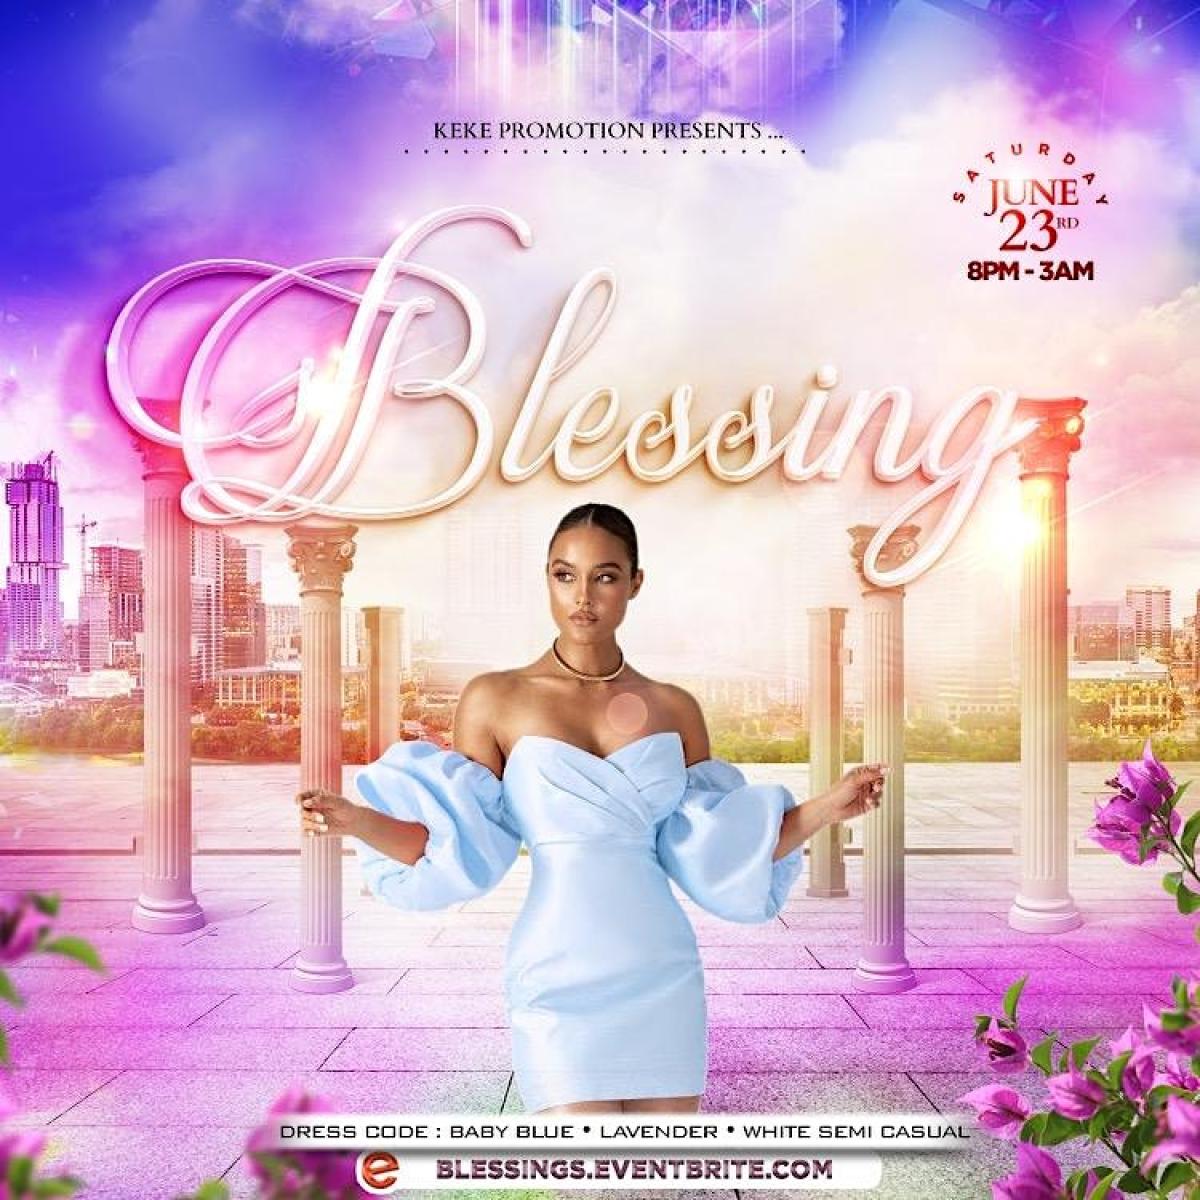 Blessings flyer or graphic.